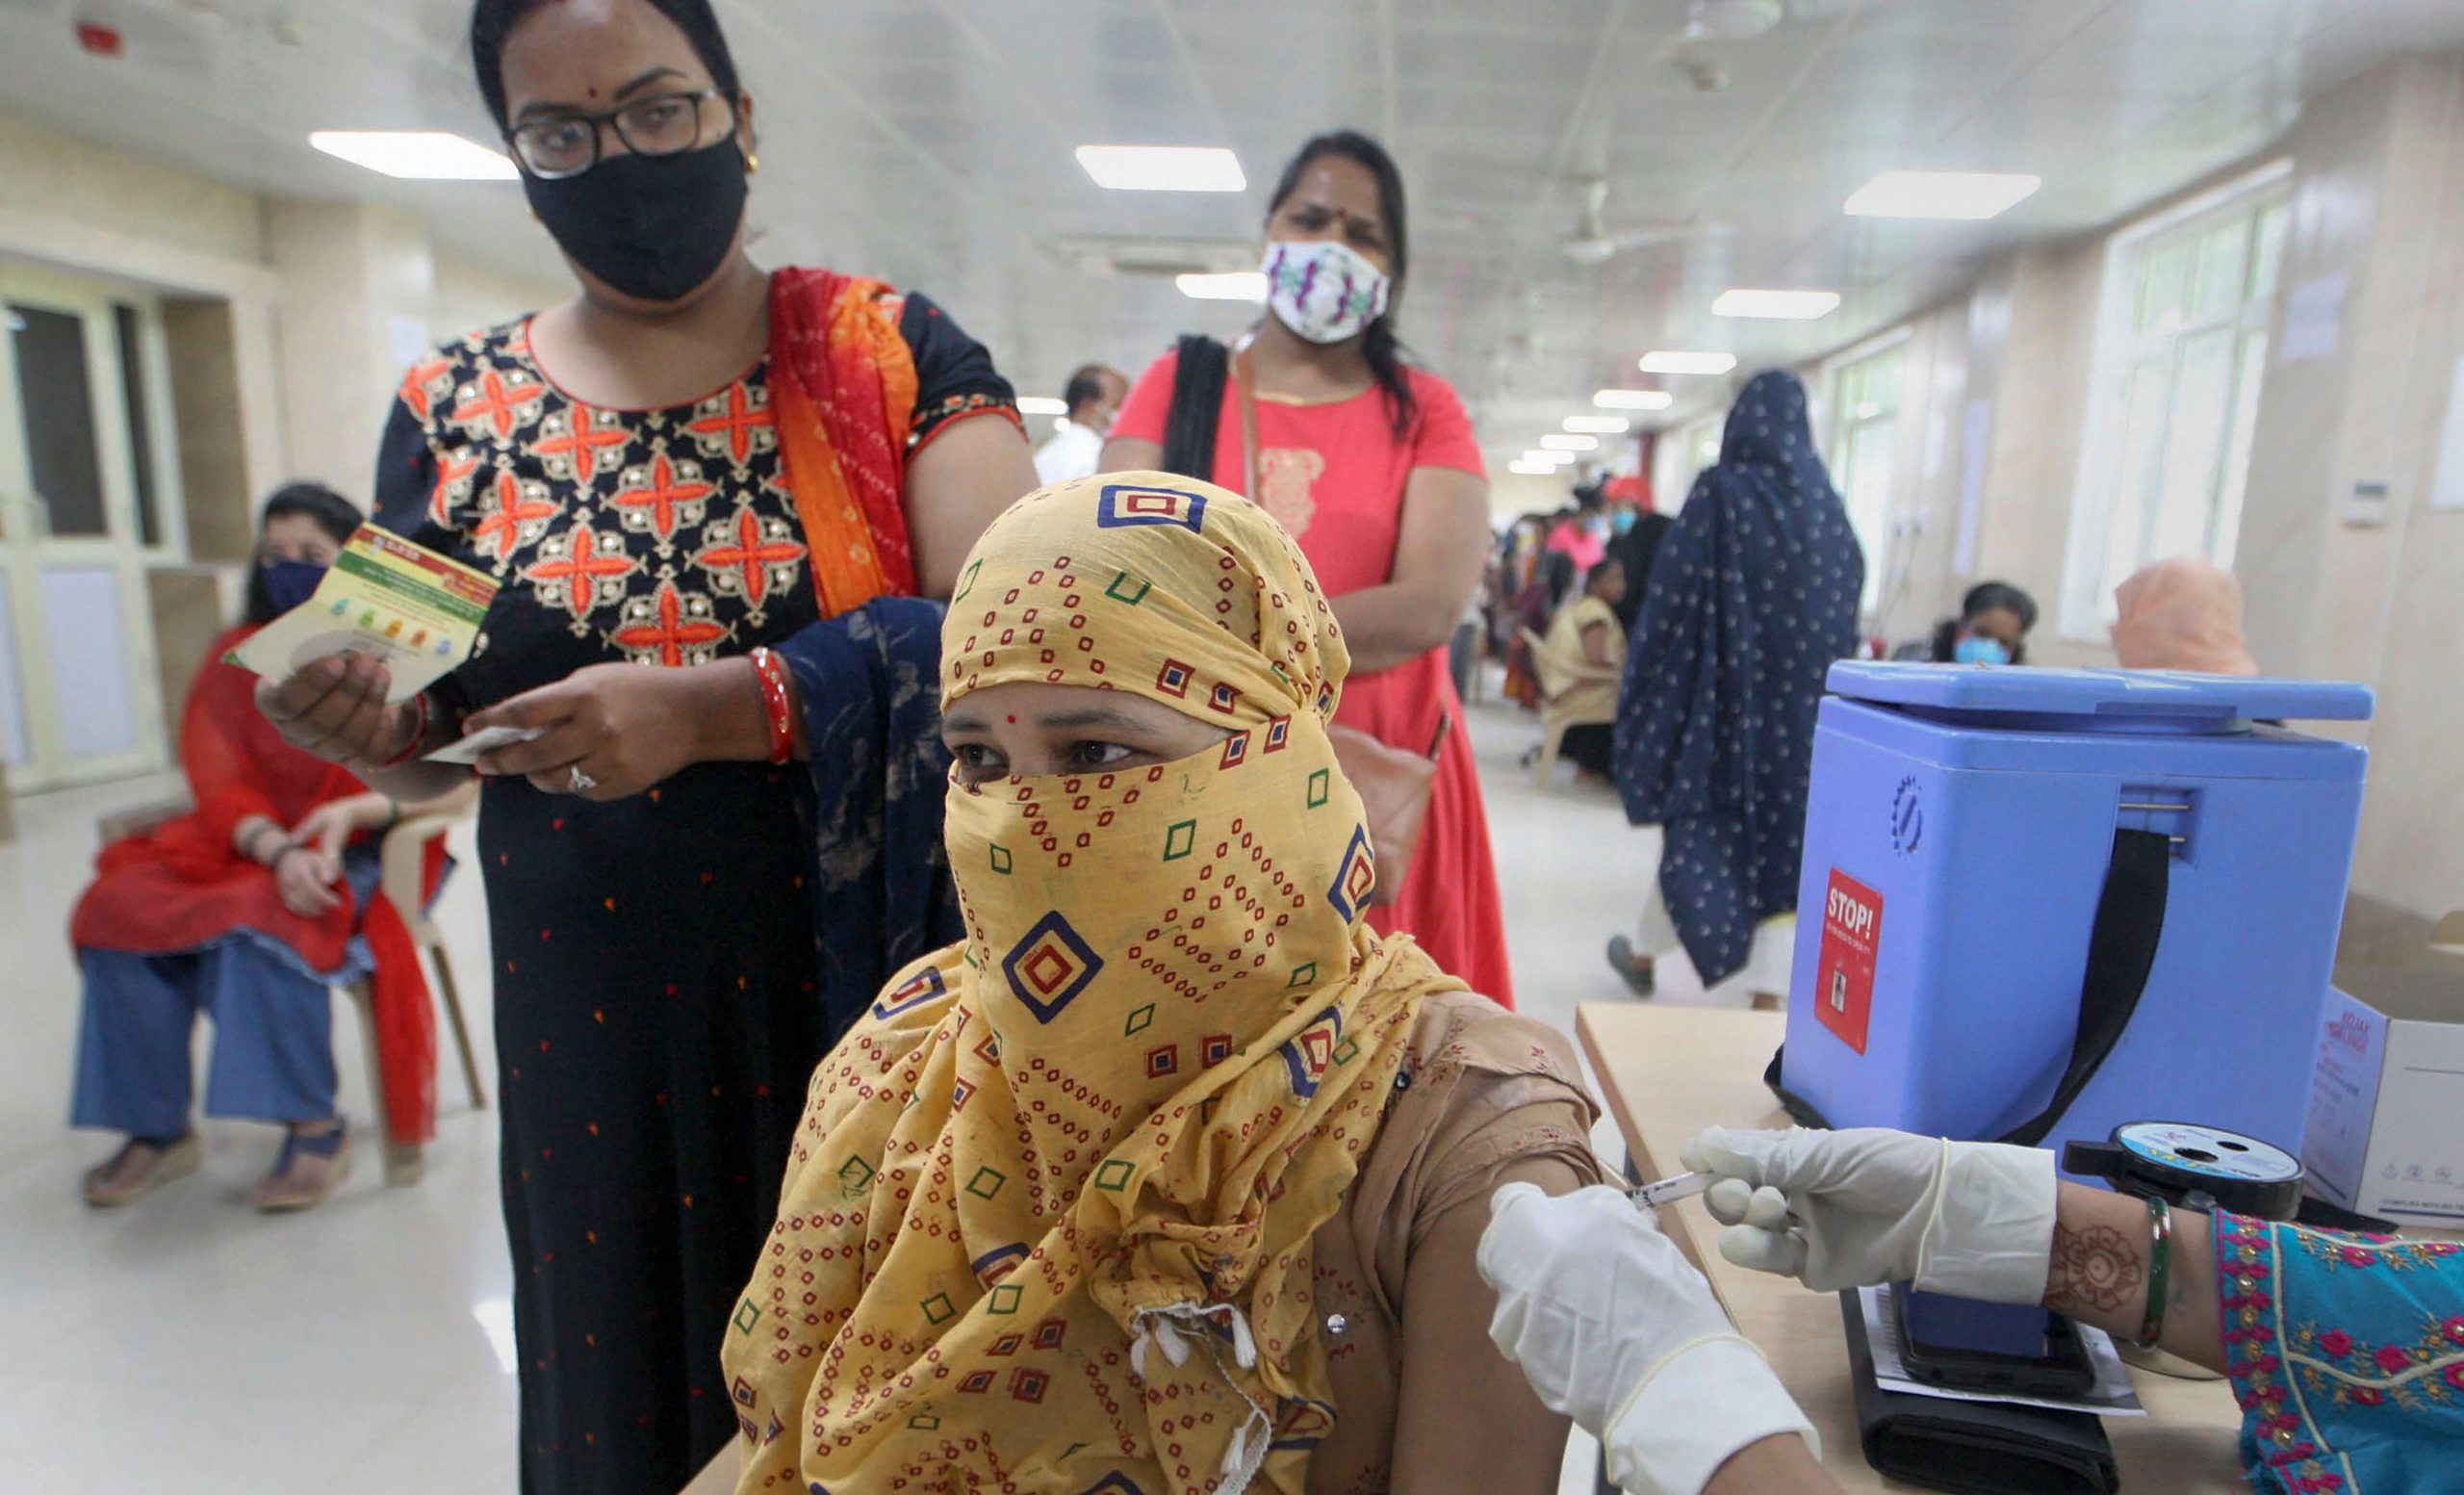 India records 37,593 new COVID-19 cases, over 1,200 more than yesterday